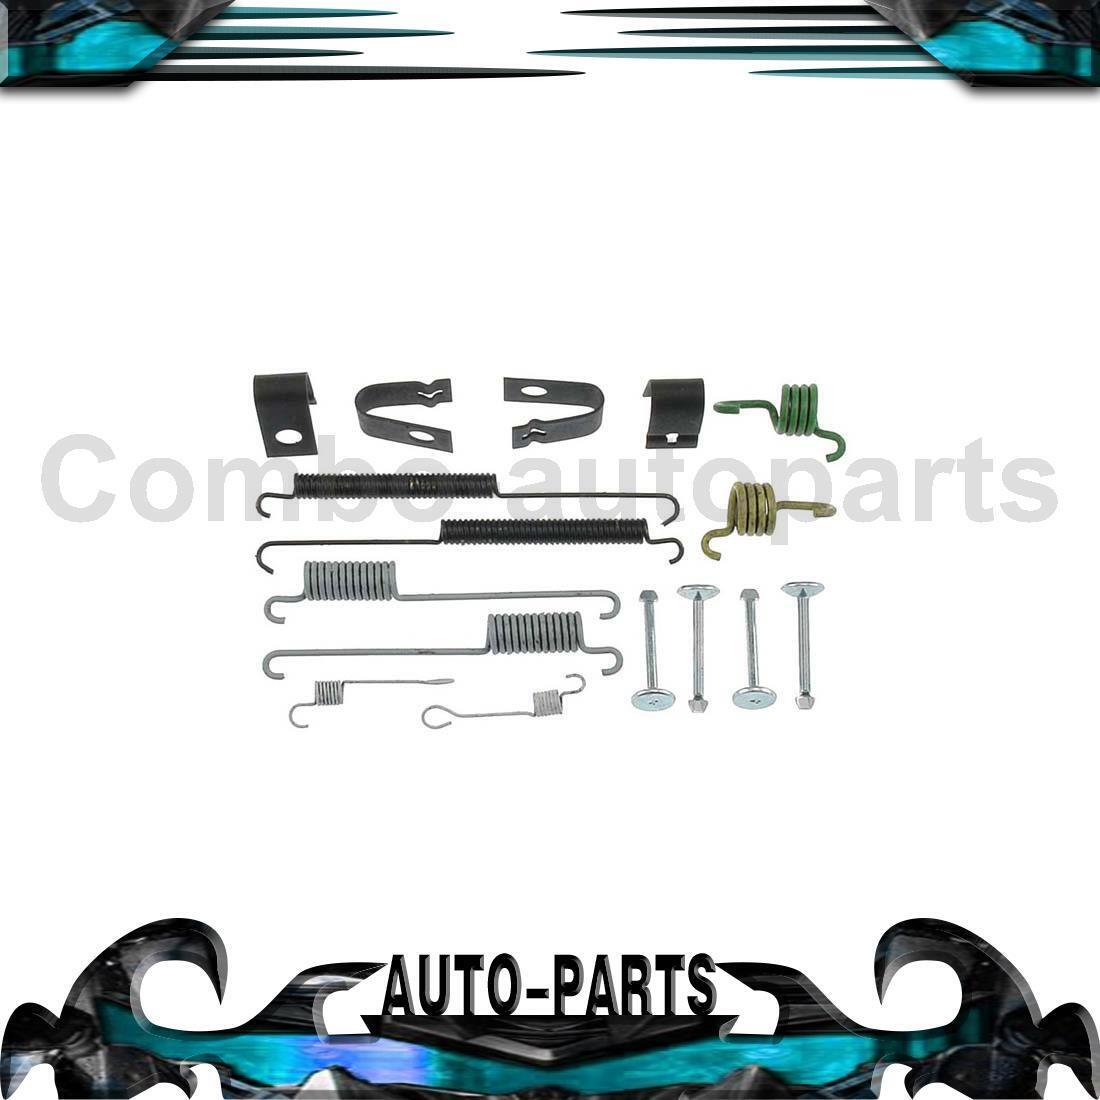 Rear Drum Brake Hardware Kit For Ford Courier 2001-2012 Ford Contour 1997-2000